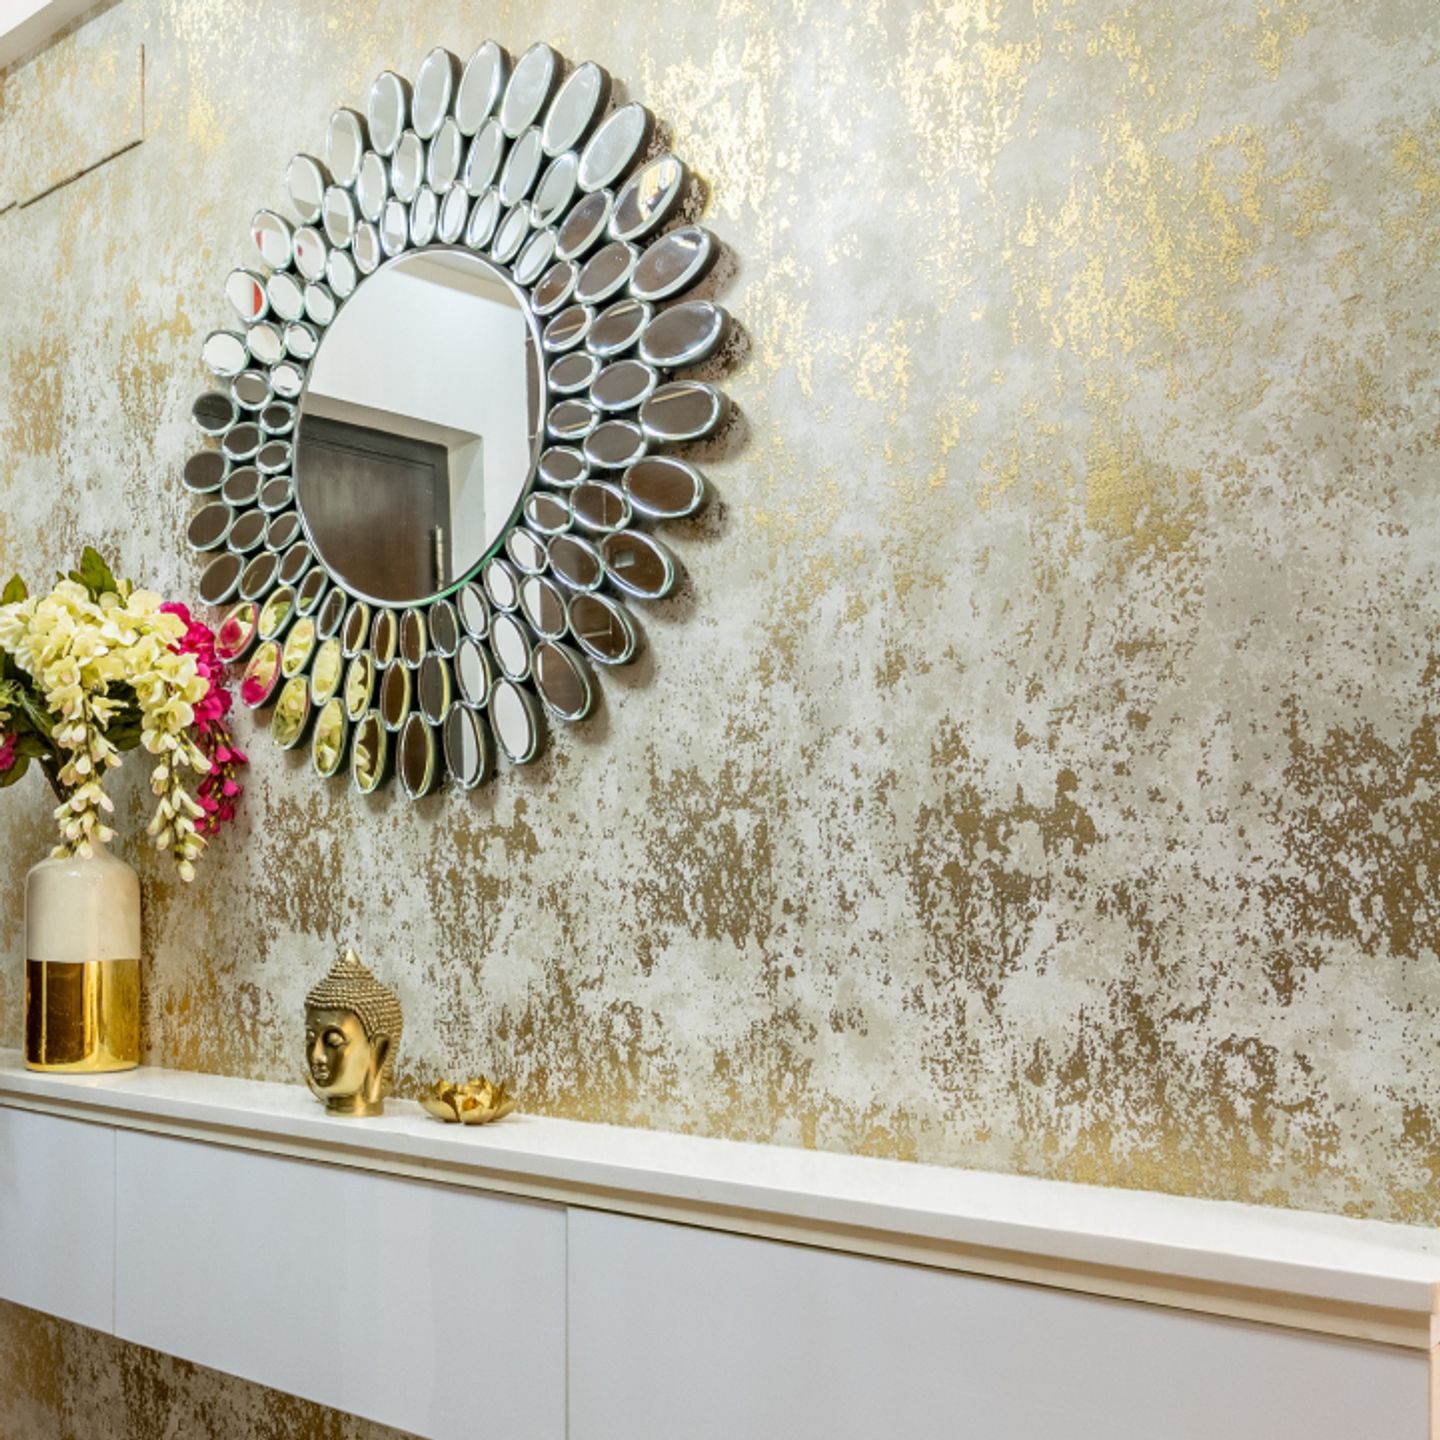 Exposed Concrete Wall Paint With A Framed Mirror - Livspace